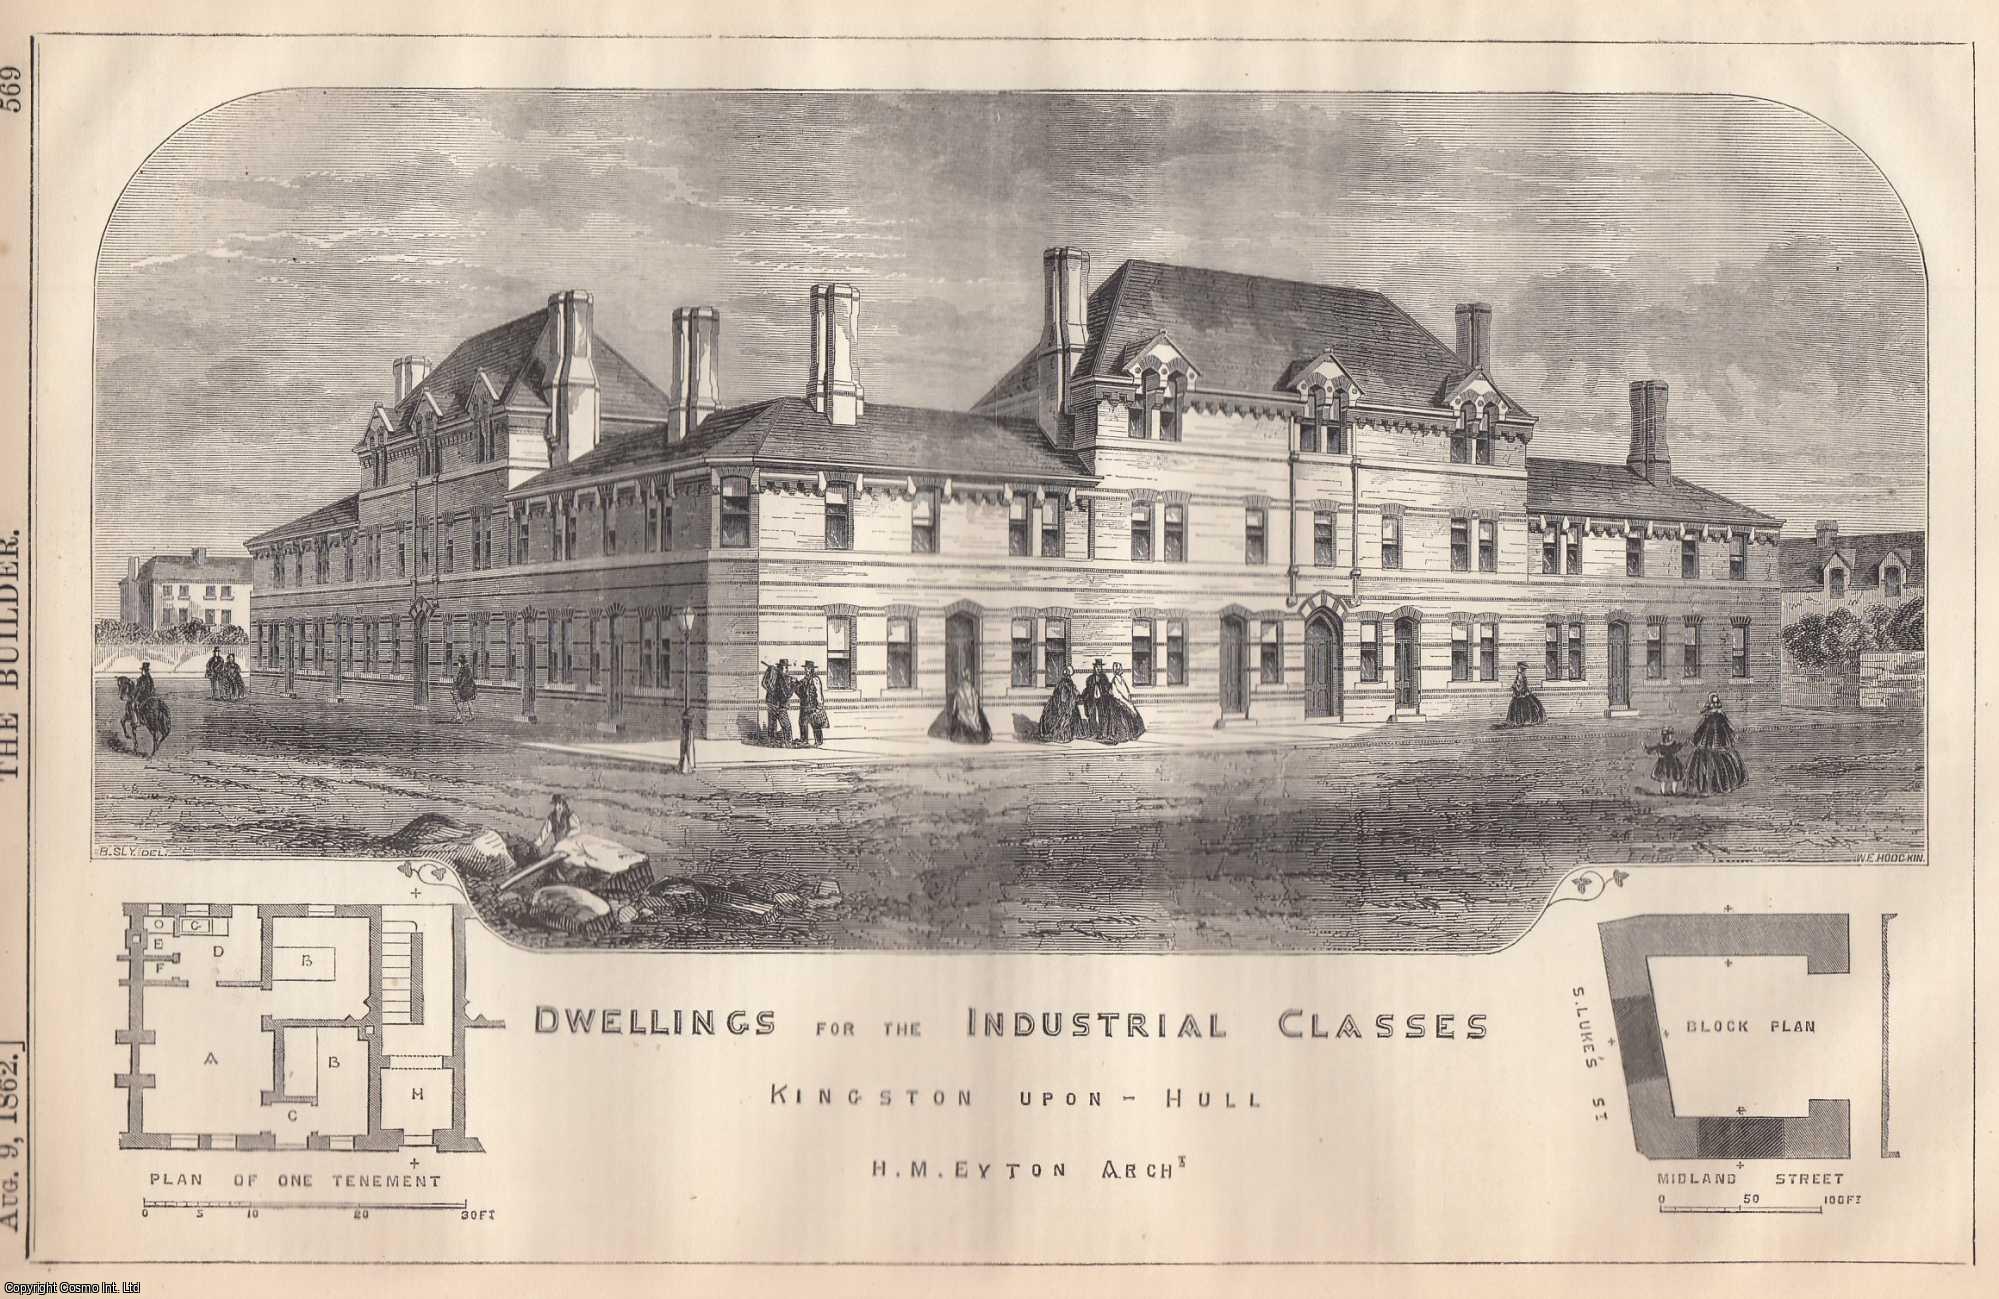 KINGSTON-UPON-HULL - 1862 : Dwellings for The Industrial Classes, Kingston-Upon-Hull. H. M. Eyton, Architect. An original page from The Builder. An Illustrated Weekly Magazine, for the Architect, Engineer, Archaeologist, Constructor, & Art-Lover.